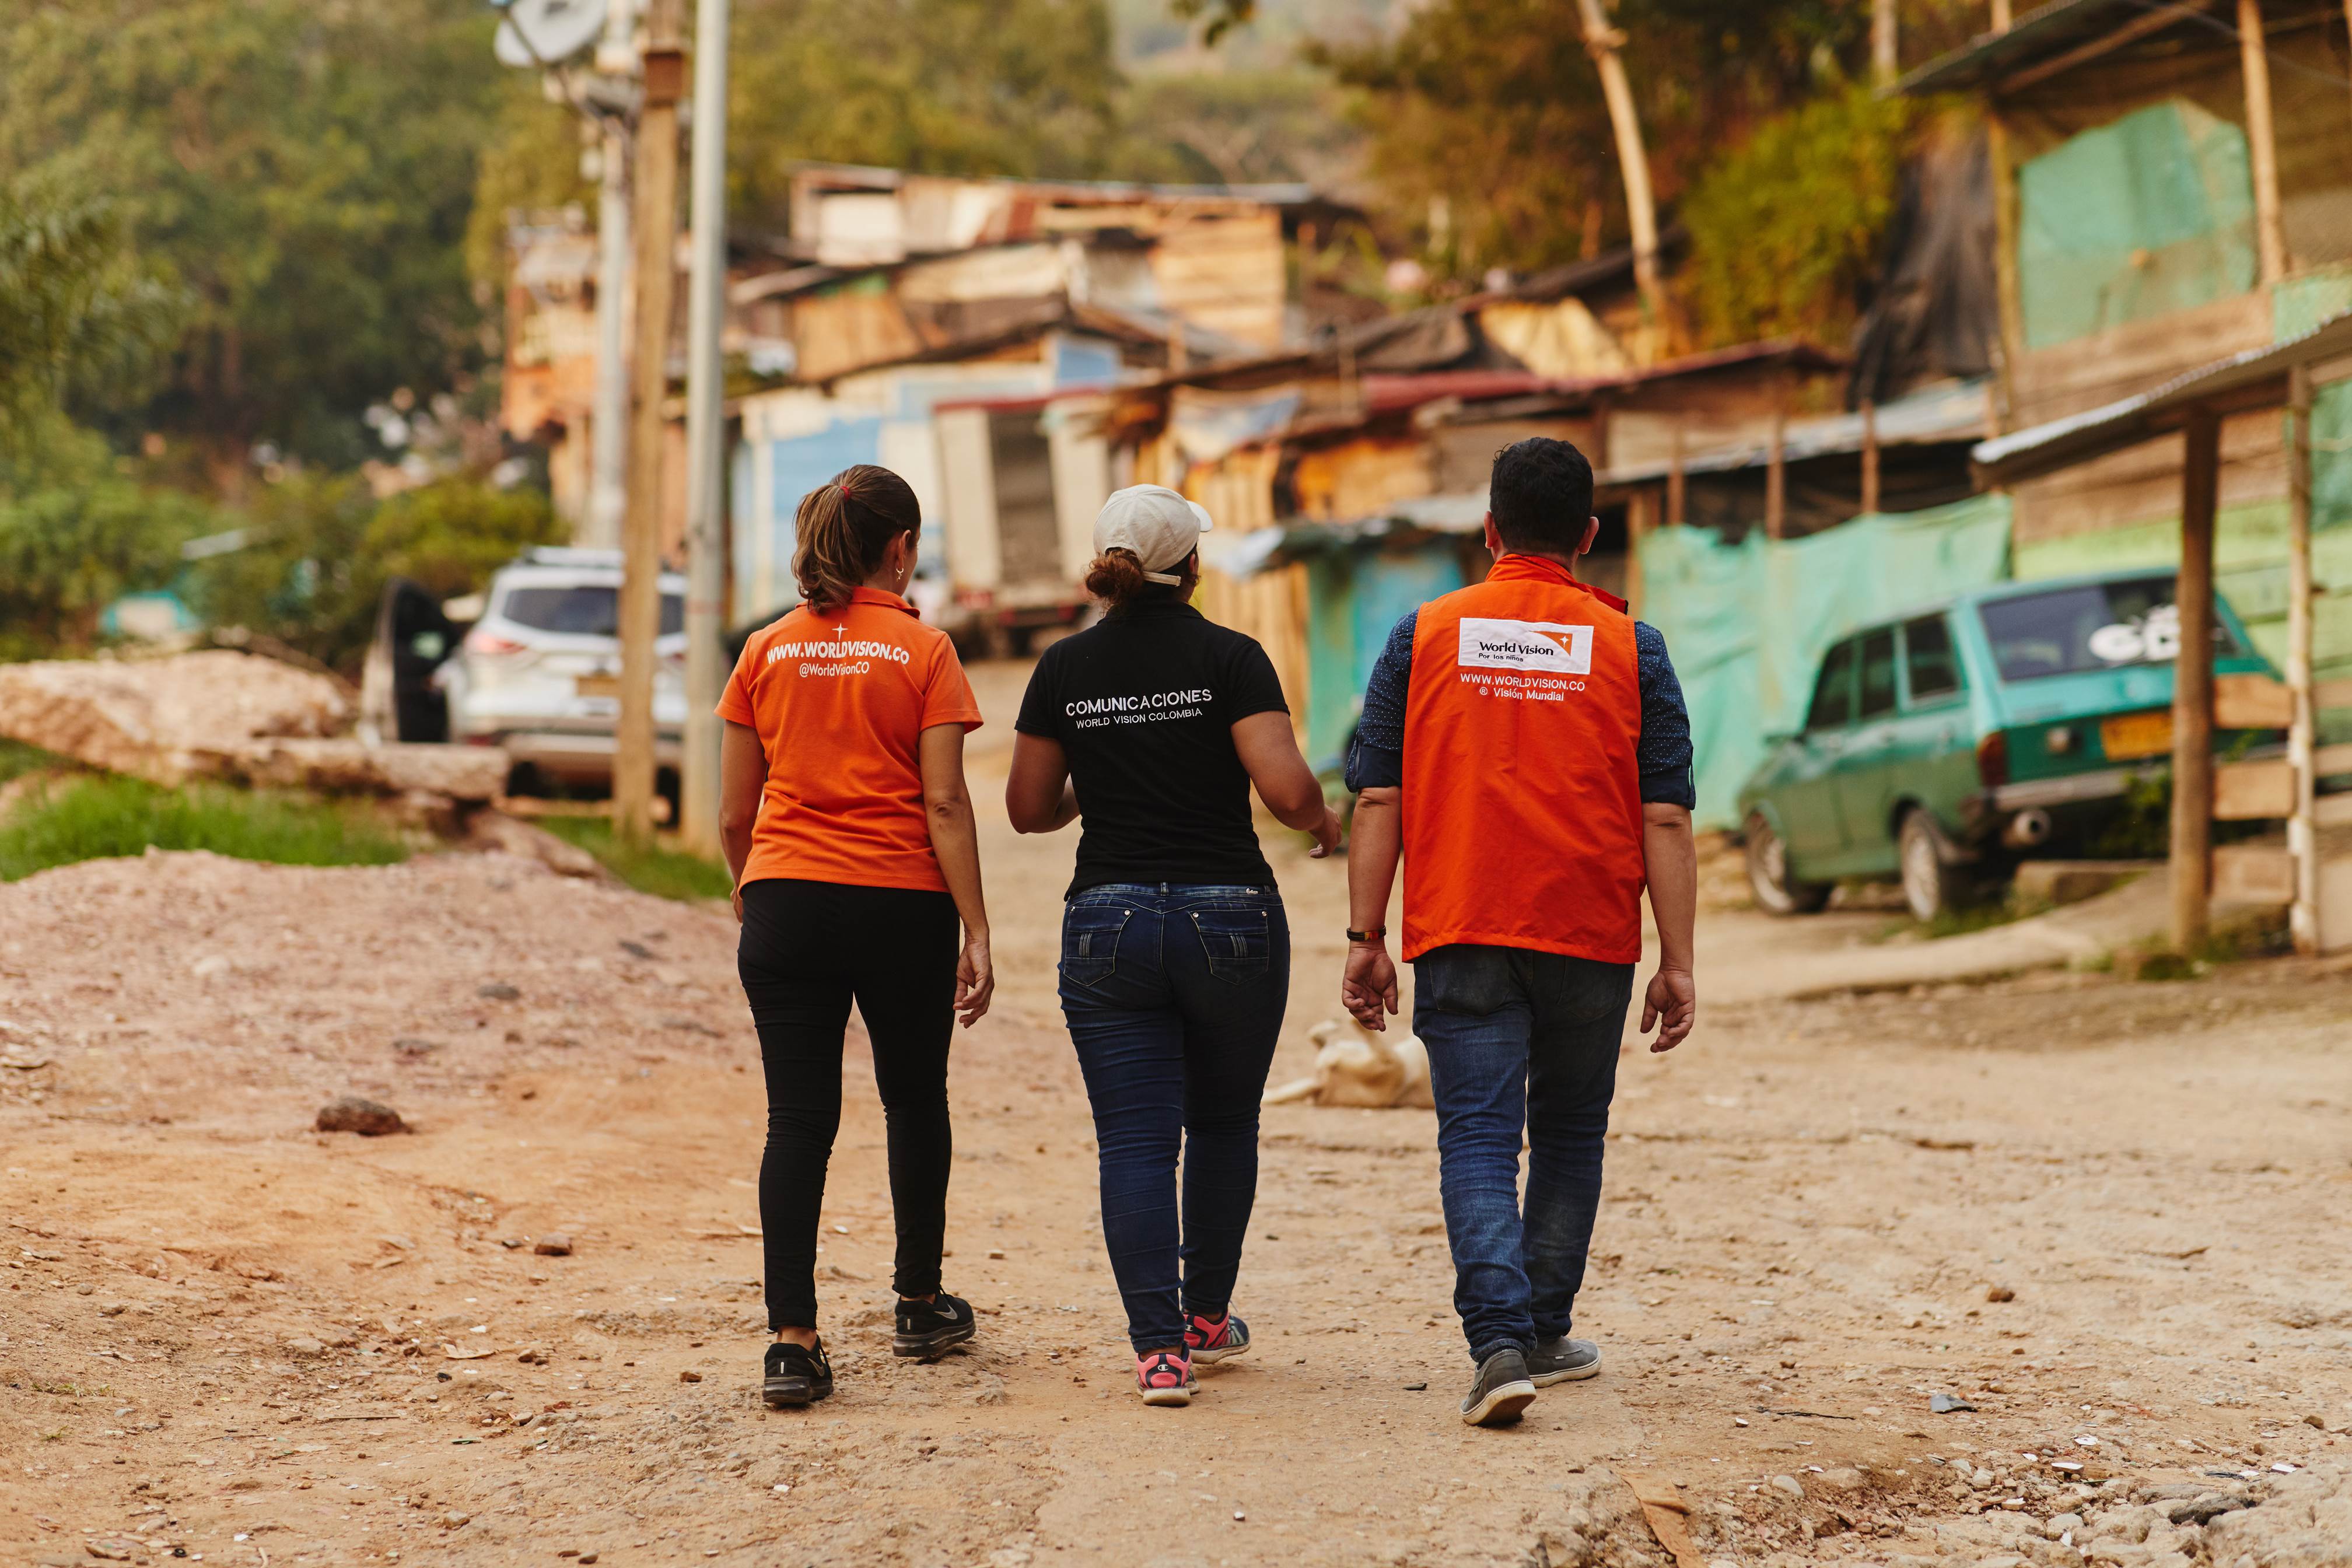 Two World Vision staff walk with a lady, backs to the camera, through streets in Columbia